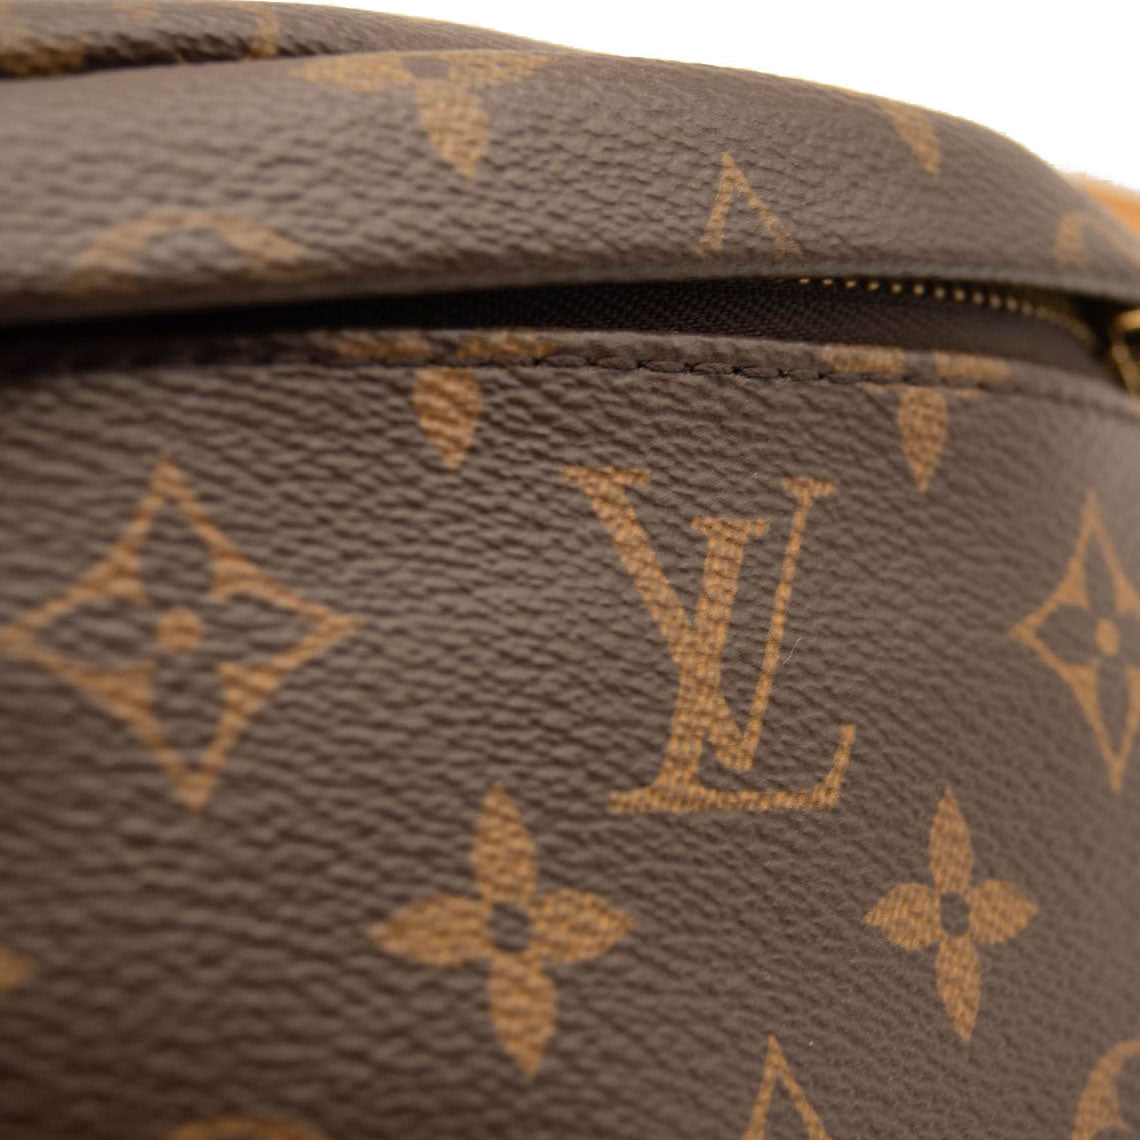 louis vuitton suitcase used